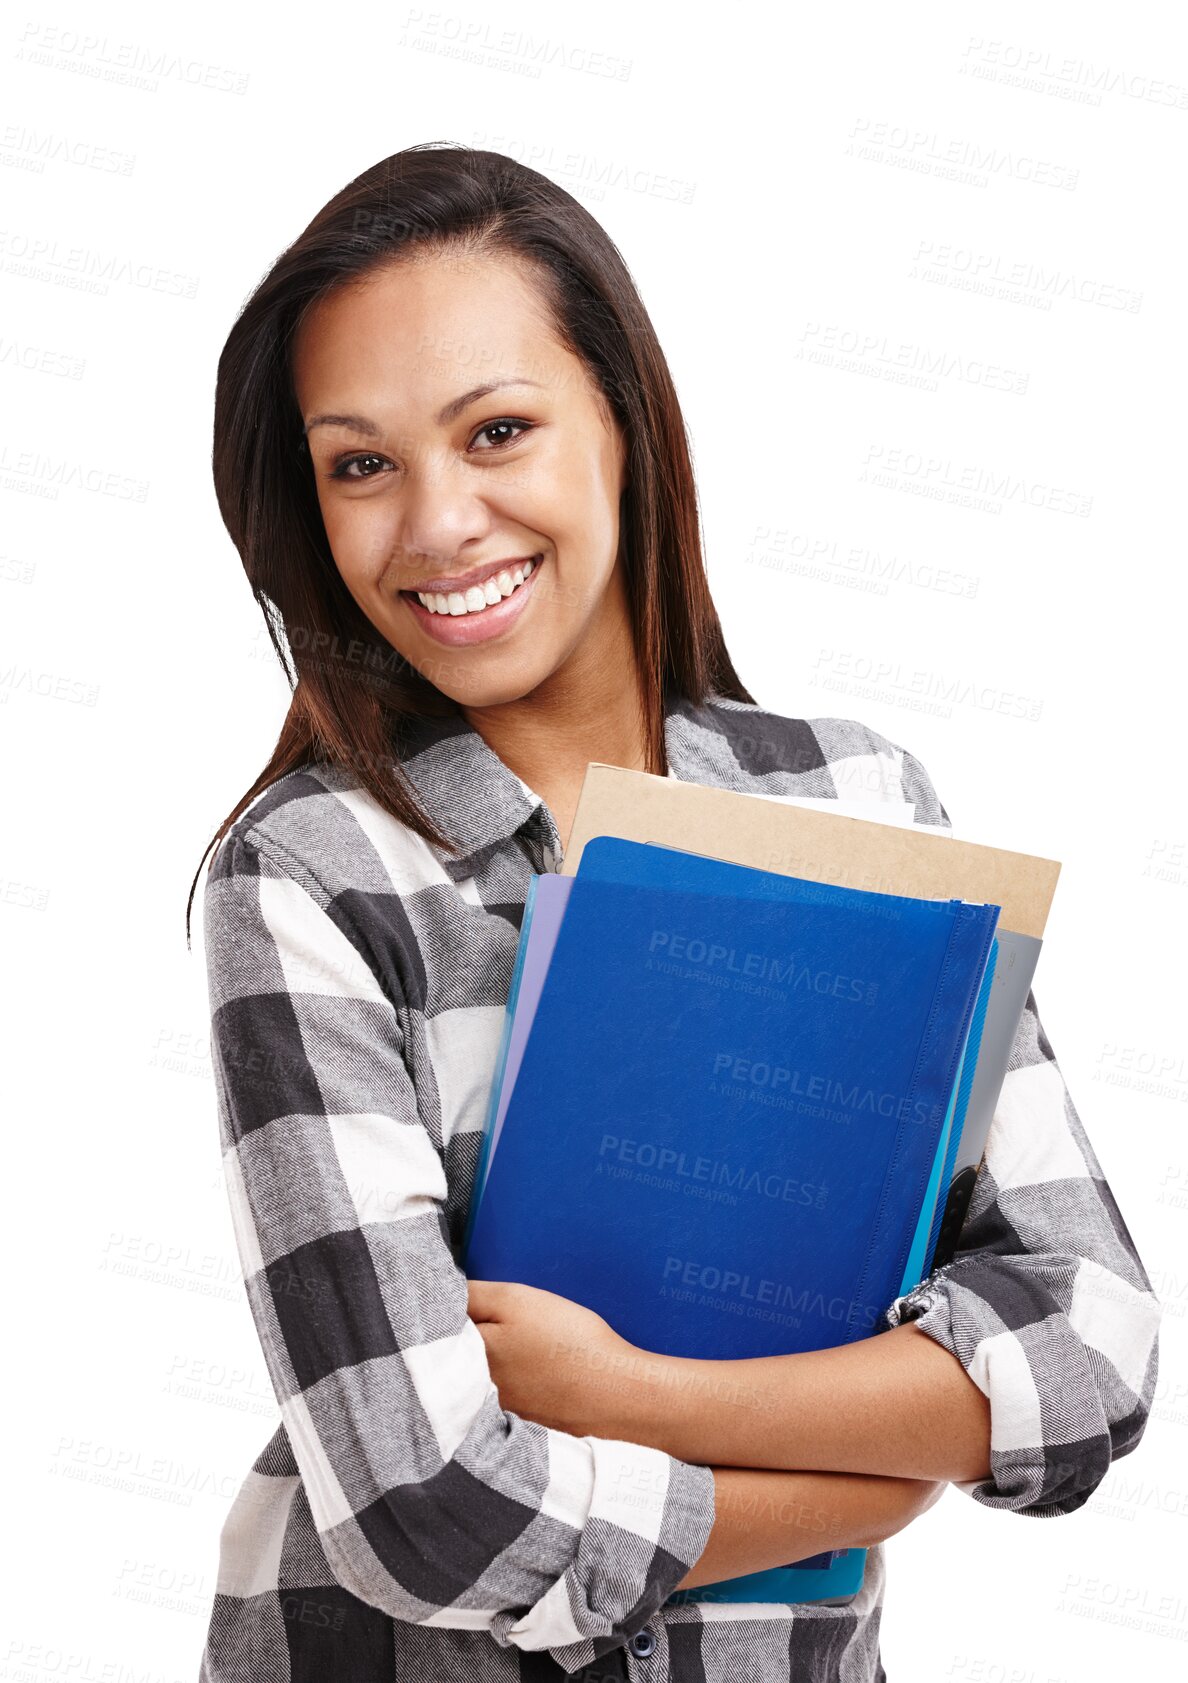 Buy stock photo Woman, student and portrait with university folders and smile and ready for class and studying. Happy, confidence and school notes with exam paper for learning isolated on transparent, png background